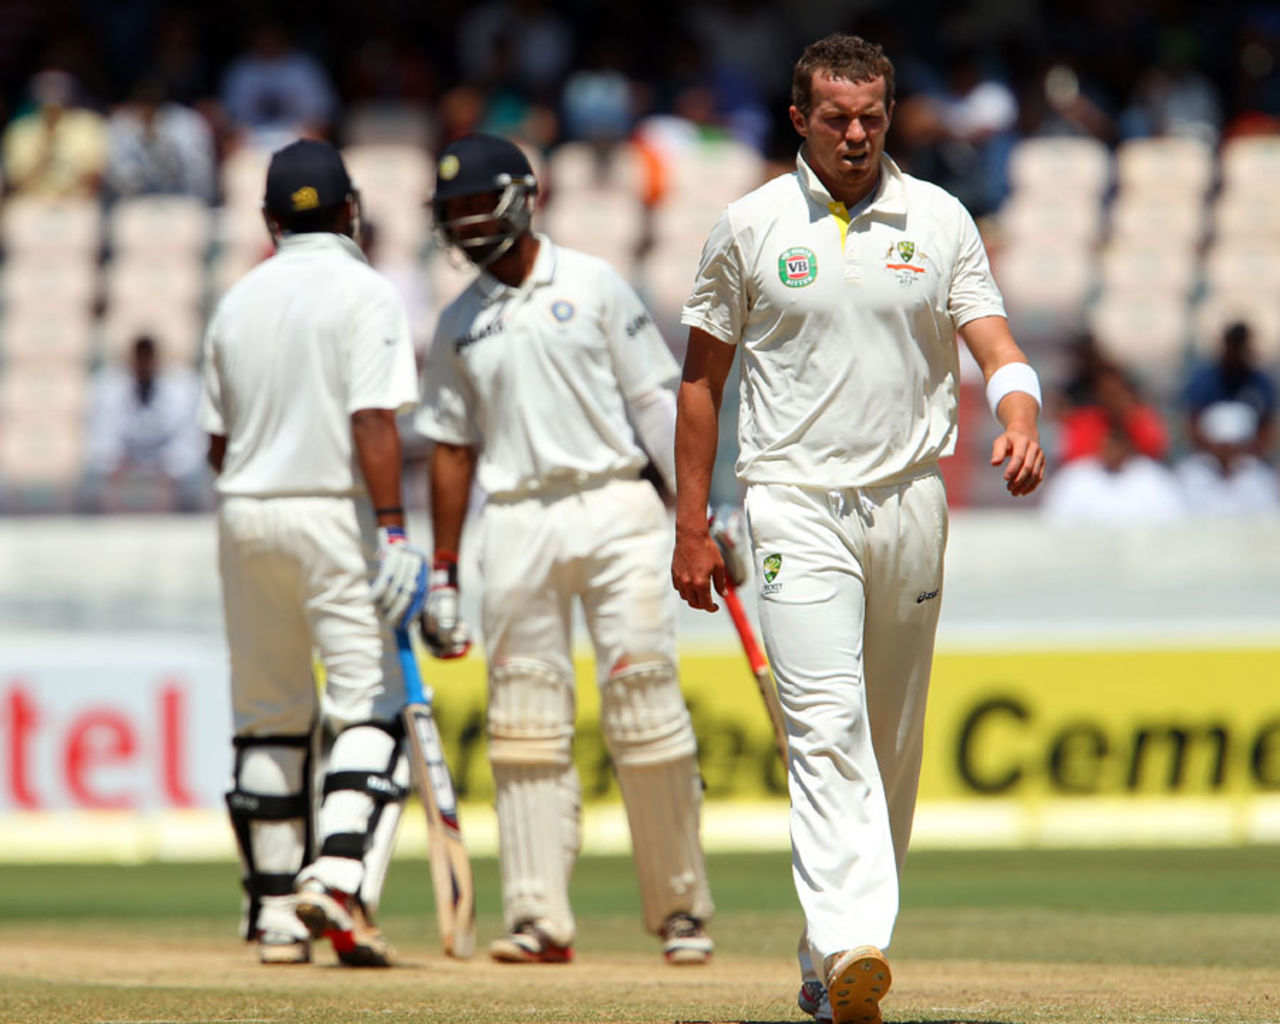 Peter Siddle walks back to his mark, India v Australia, 2nd Test, Hyderabad, 2nd day, March 3, 2013